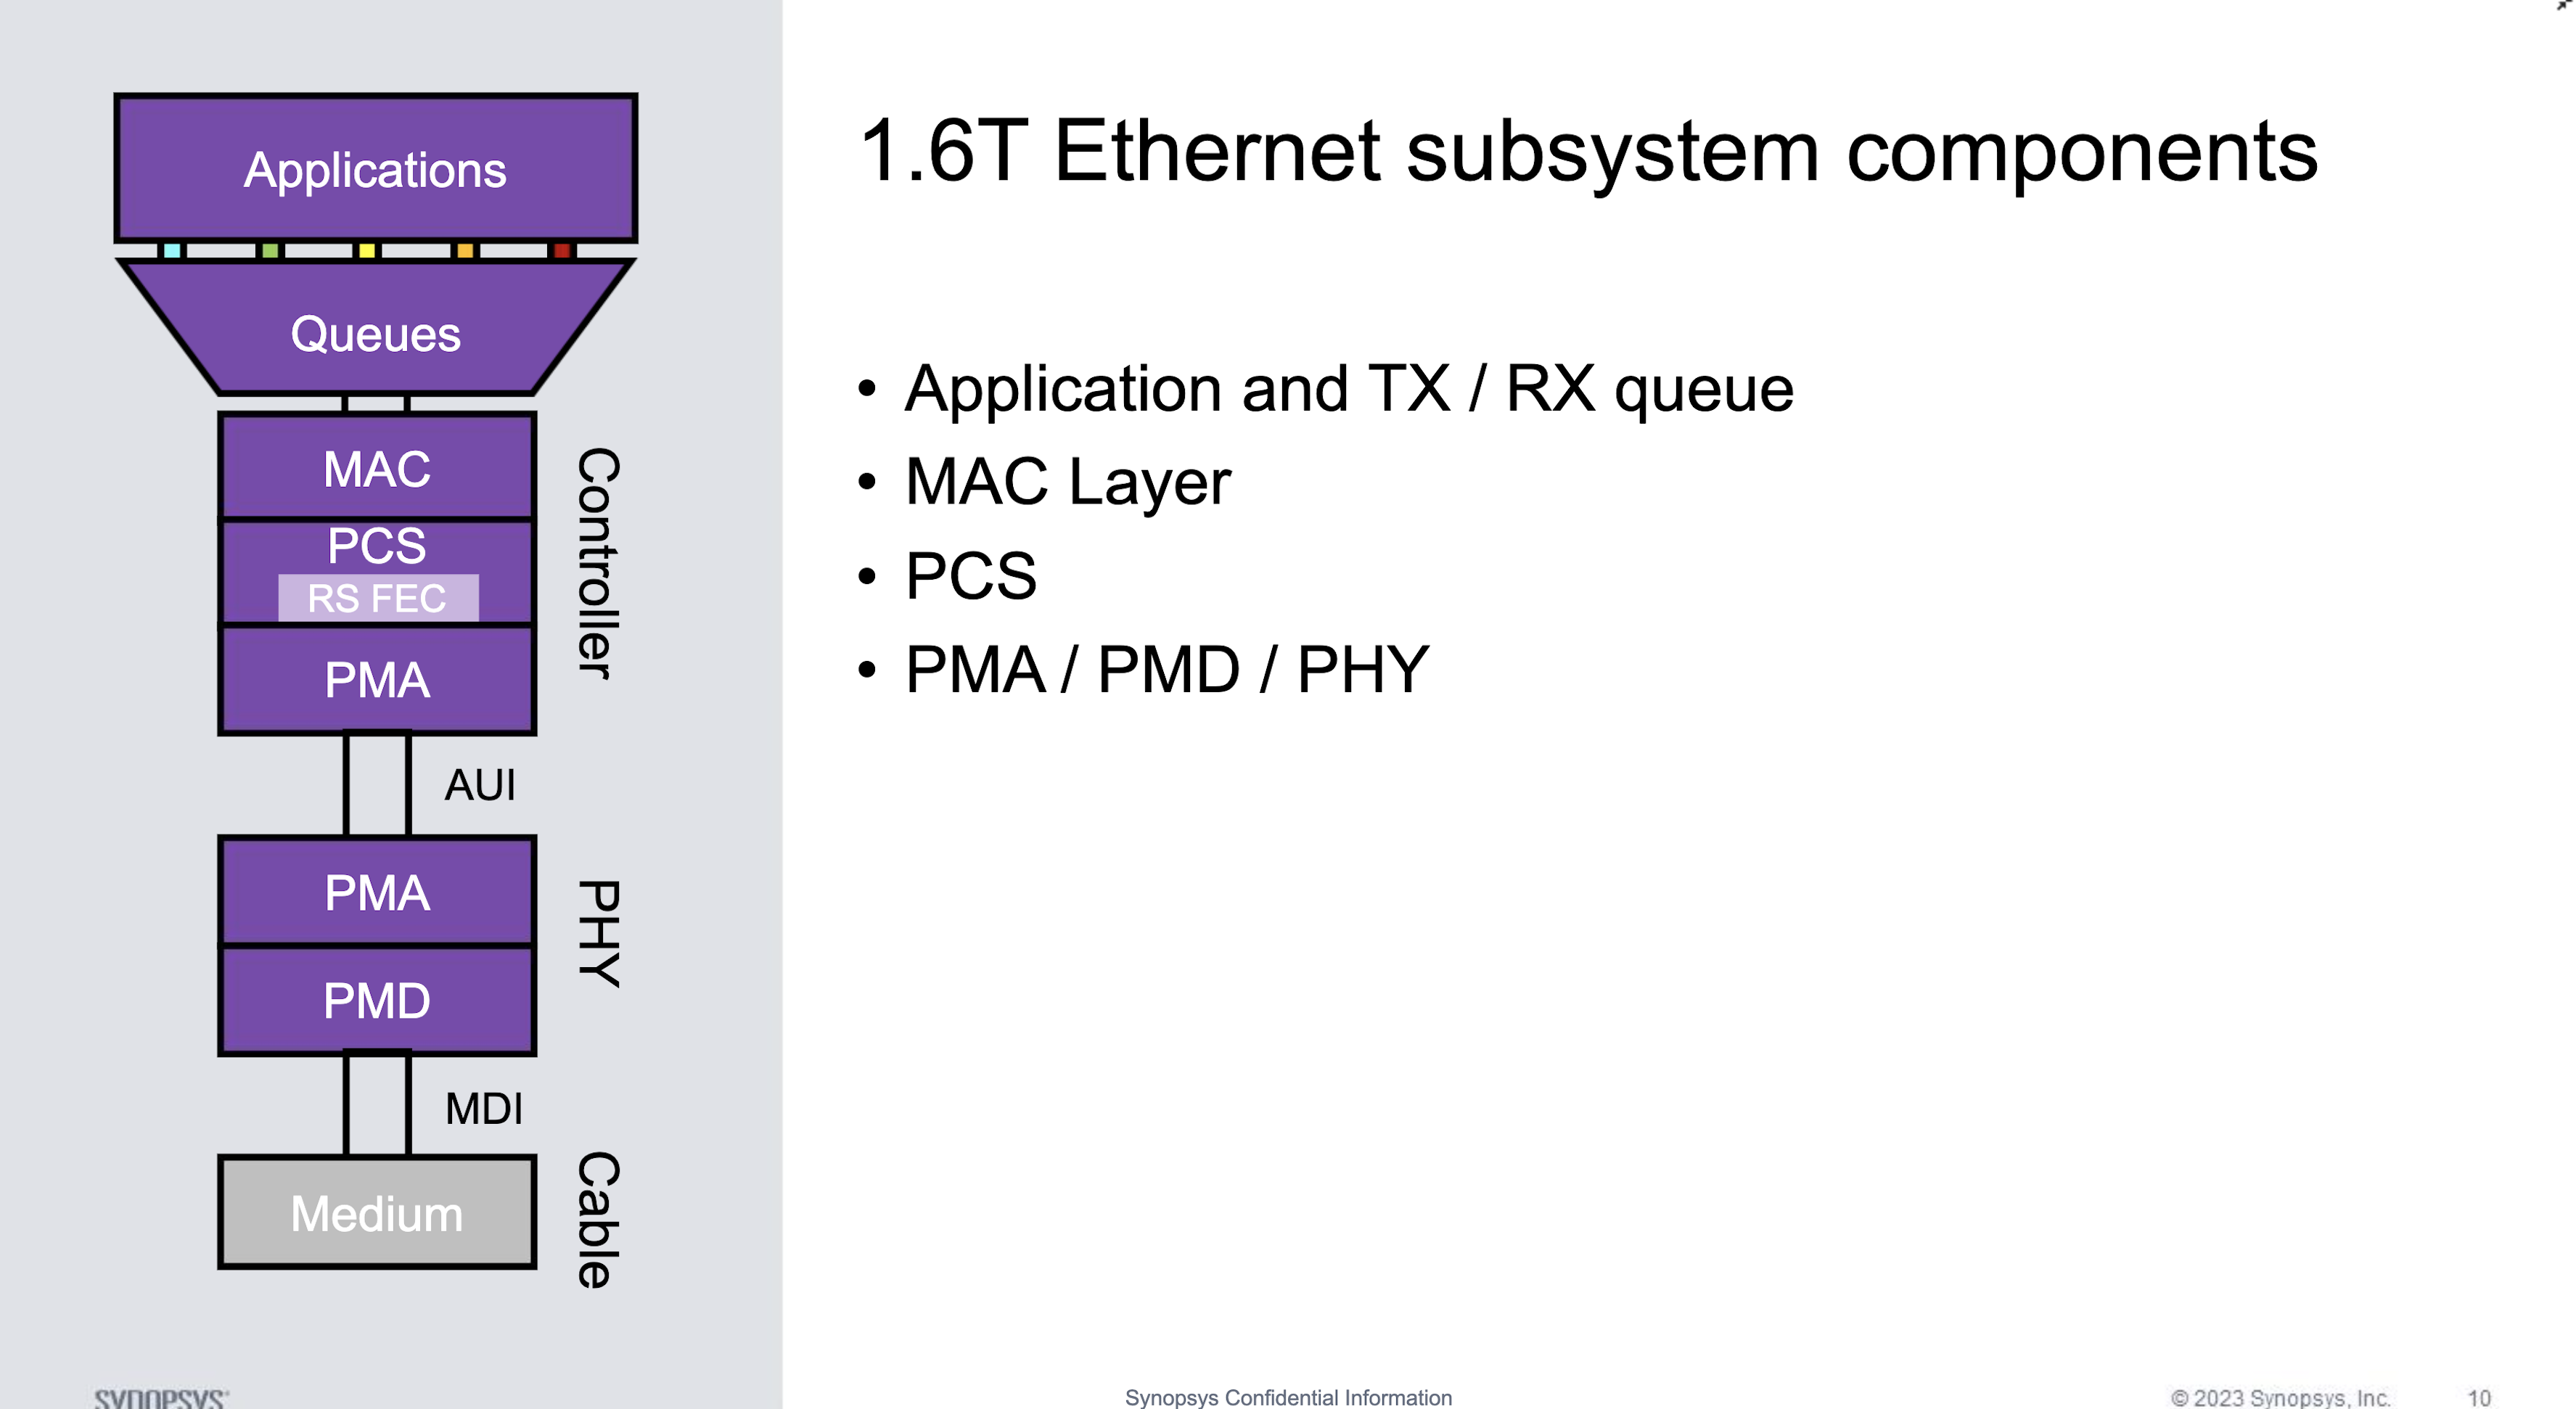 1.6T Ethernet Subsystem Components